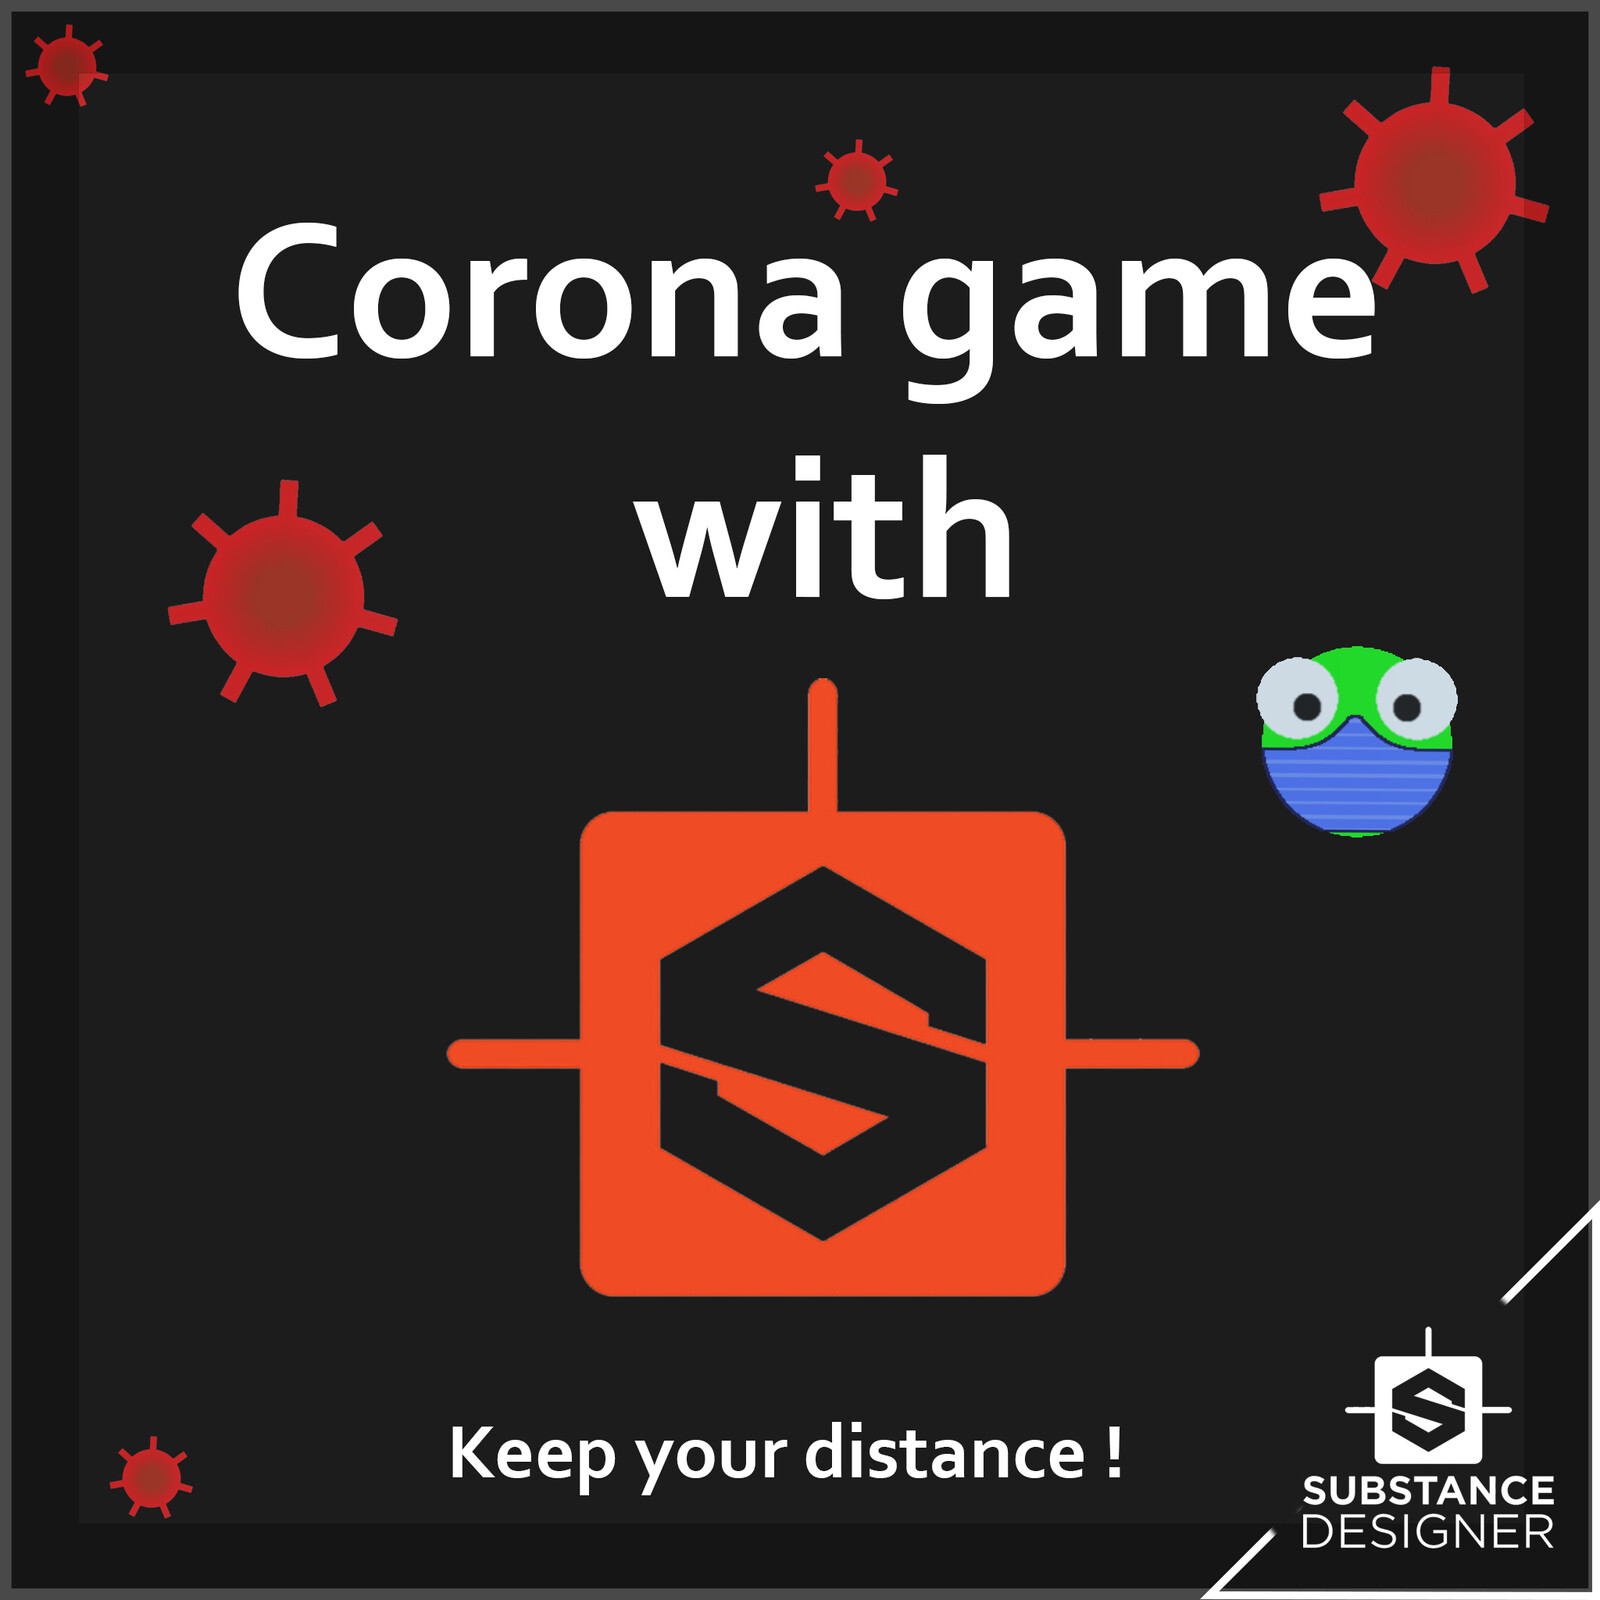 Corona game with Substance Designer